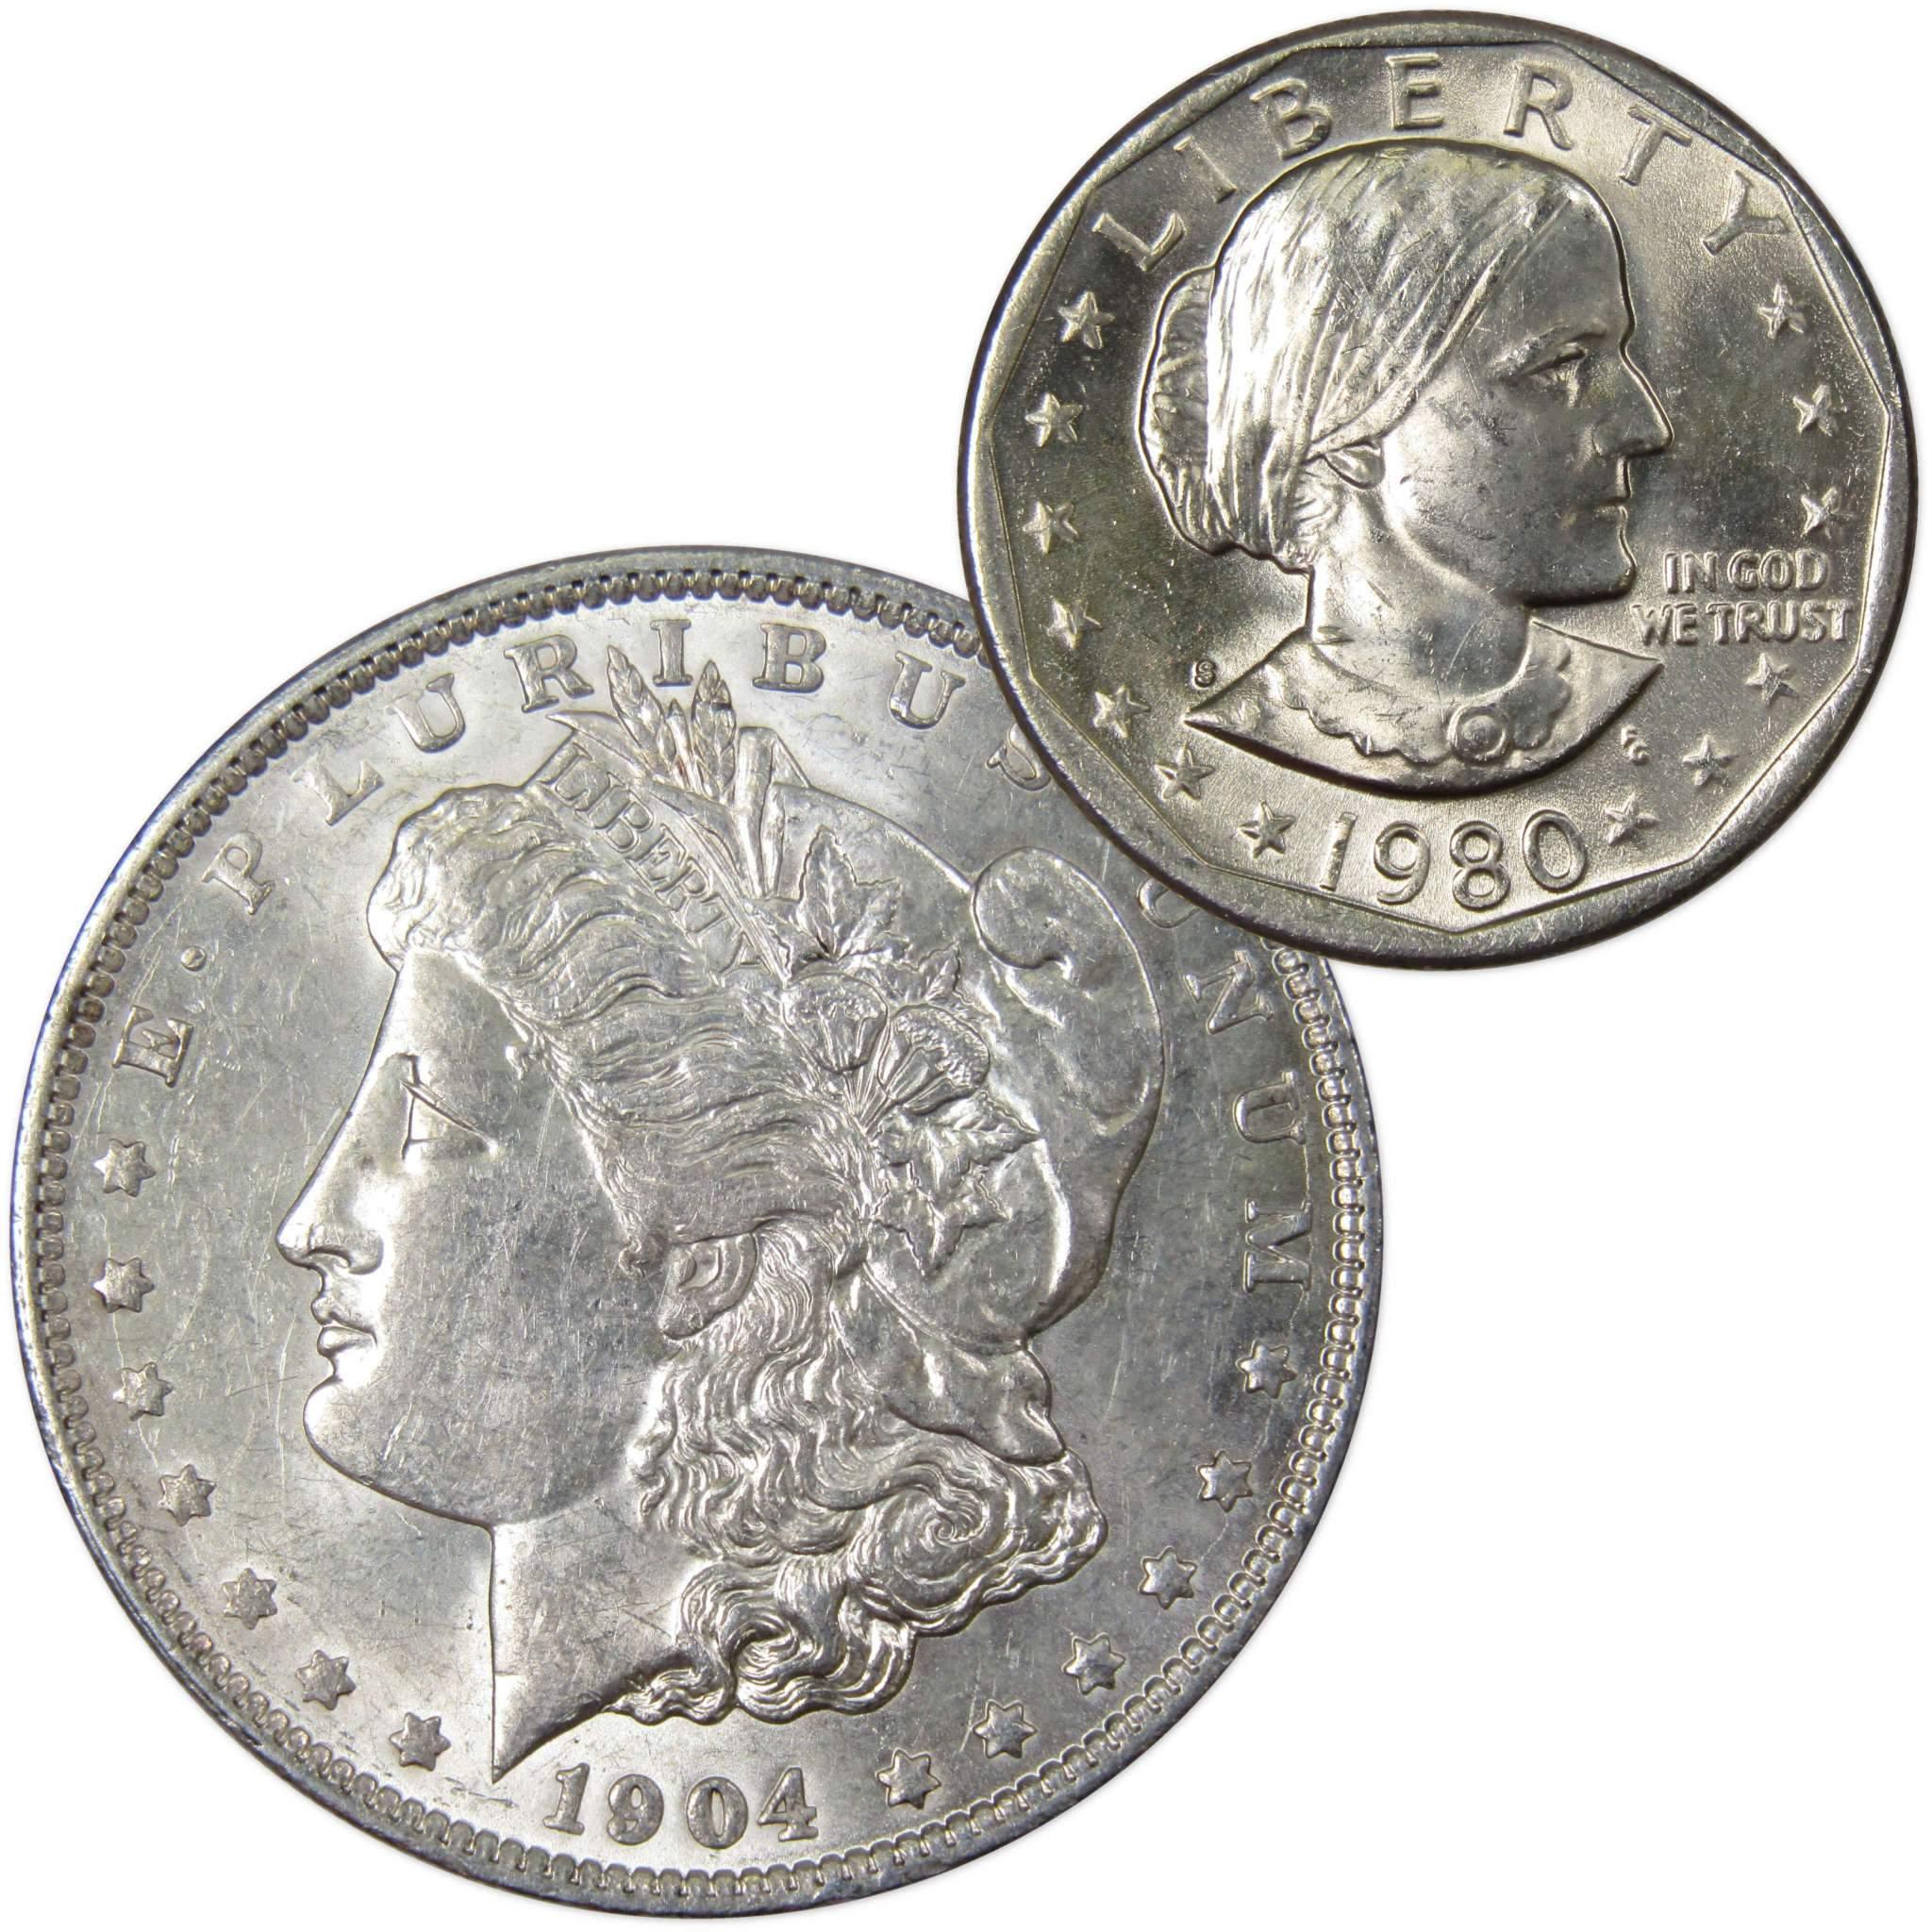 1904 O Morgan Dollar AU About Uncirculated with 1980 S SBA$ BU Uncirculated - Morgan coin - Morgan silver dollar - Morgan silver dollar for sale - Profile Coins &amp; Collectibles